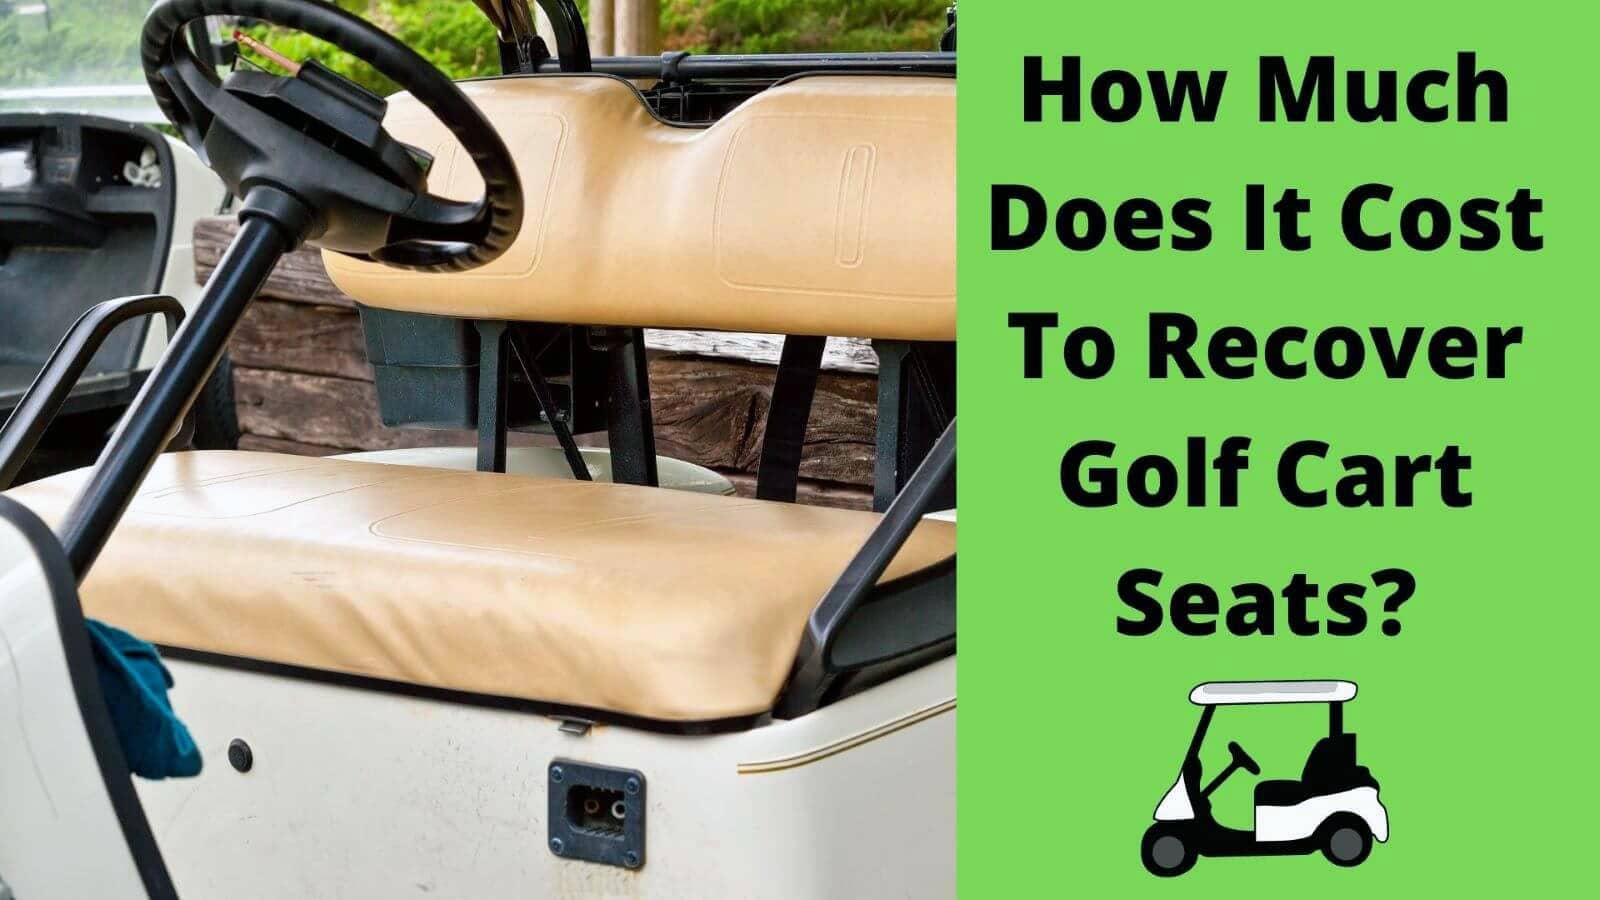 How Much Does It Cost To Recover Golf Cart Seats?